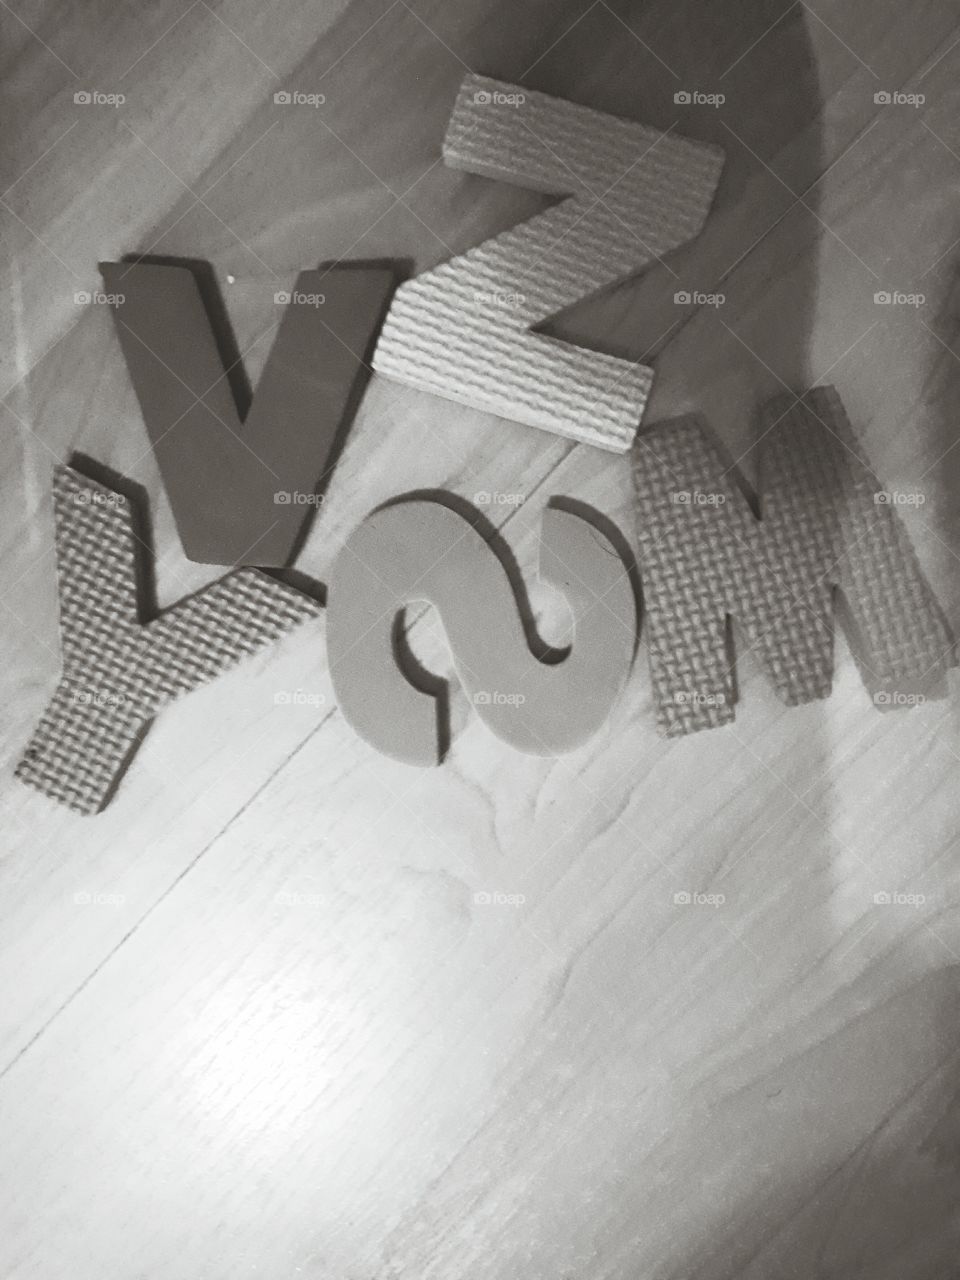 Foam Toy Letters on the floor- Black and white is my true nature